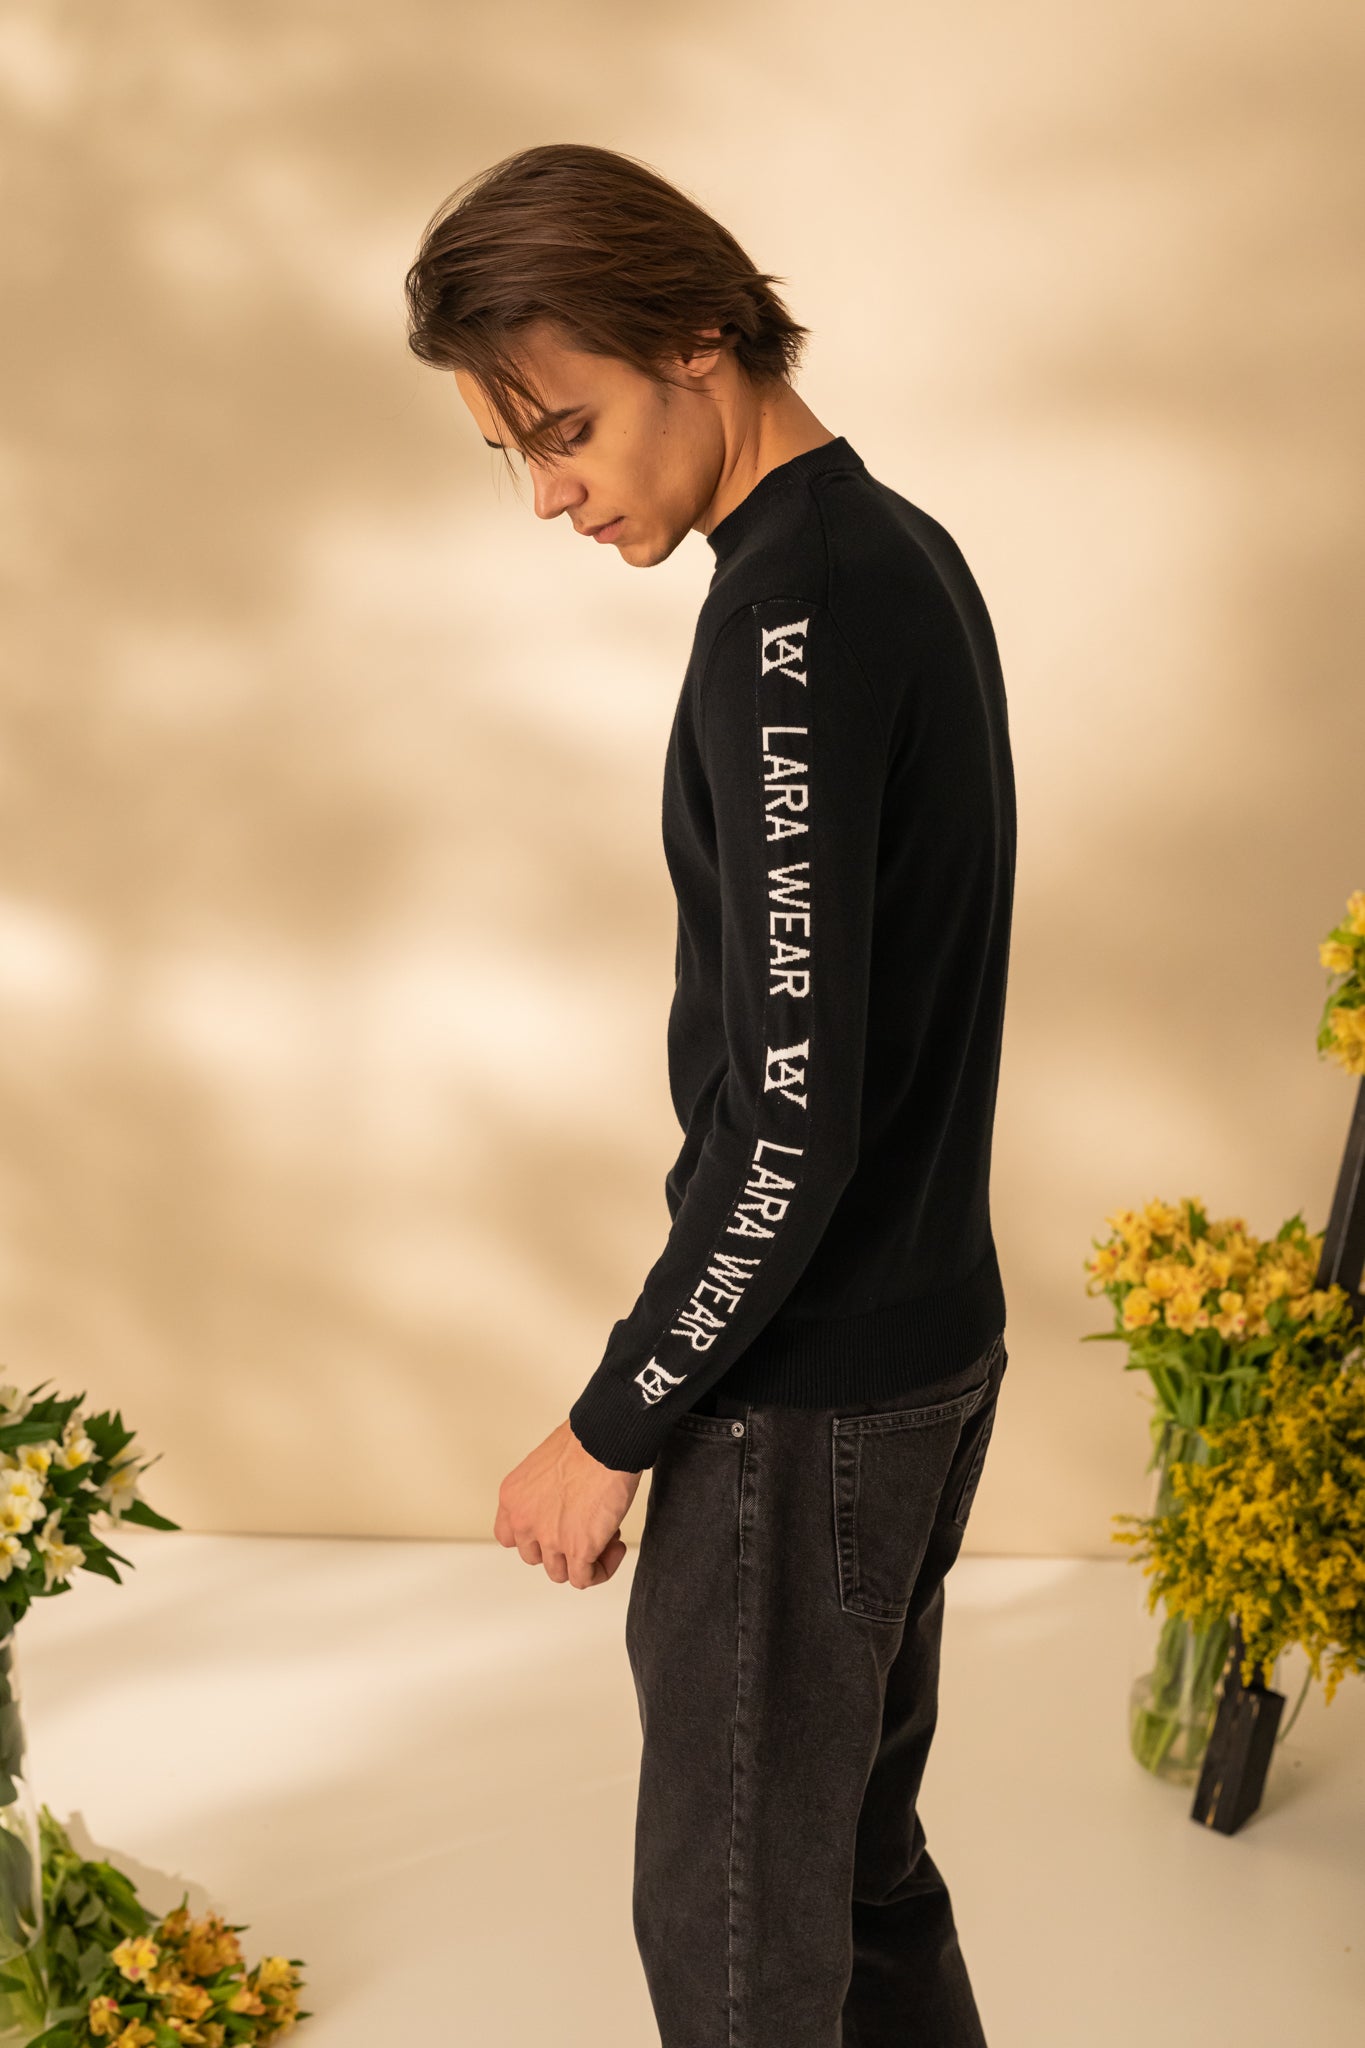 Slim pullover with long sleeves